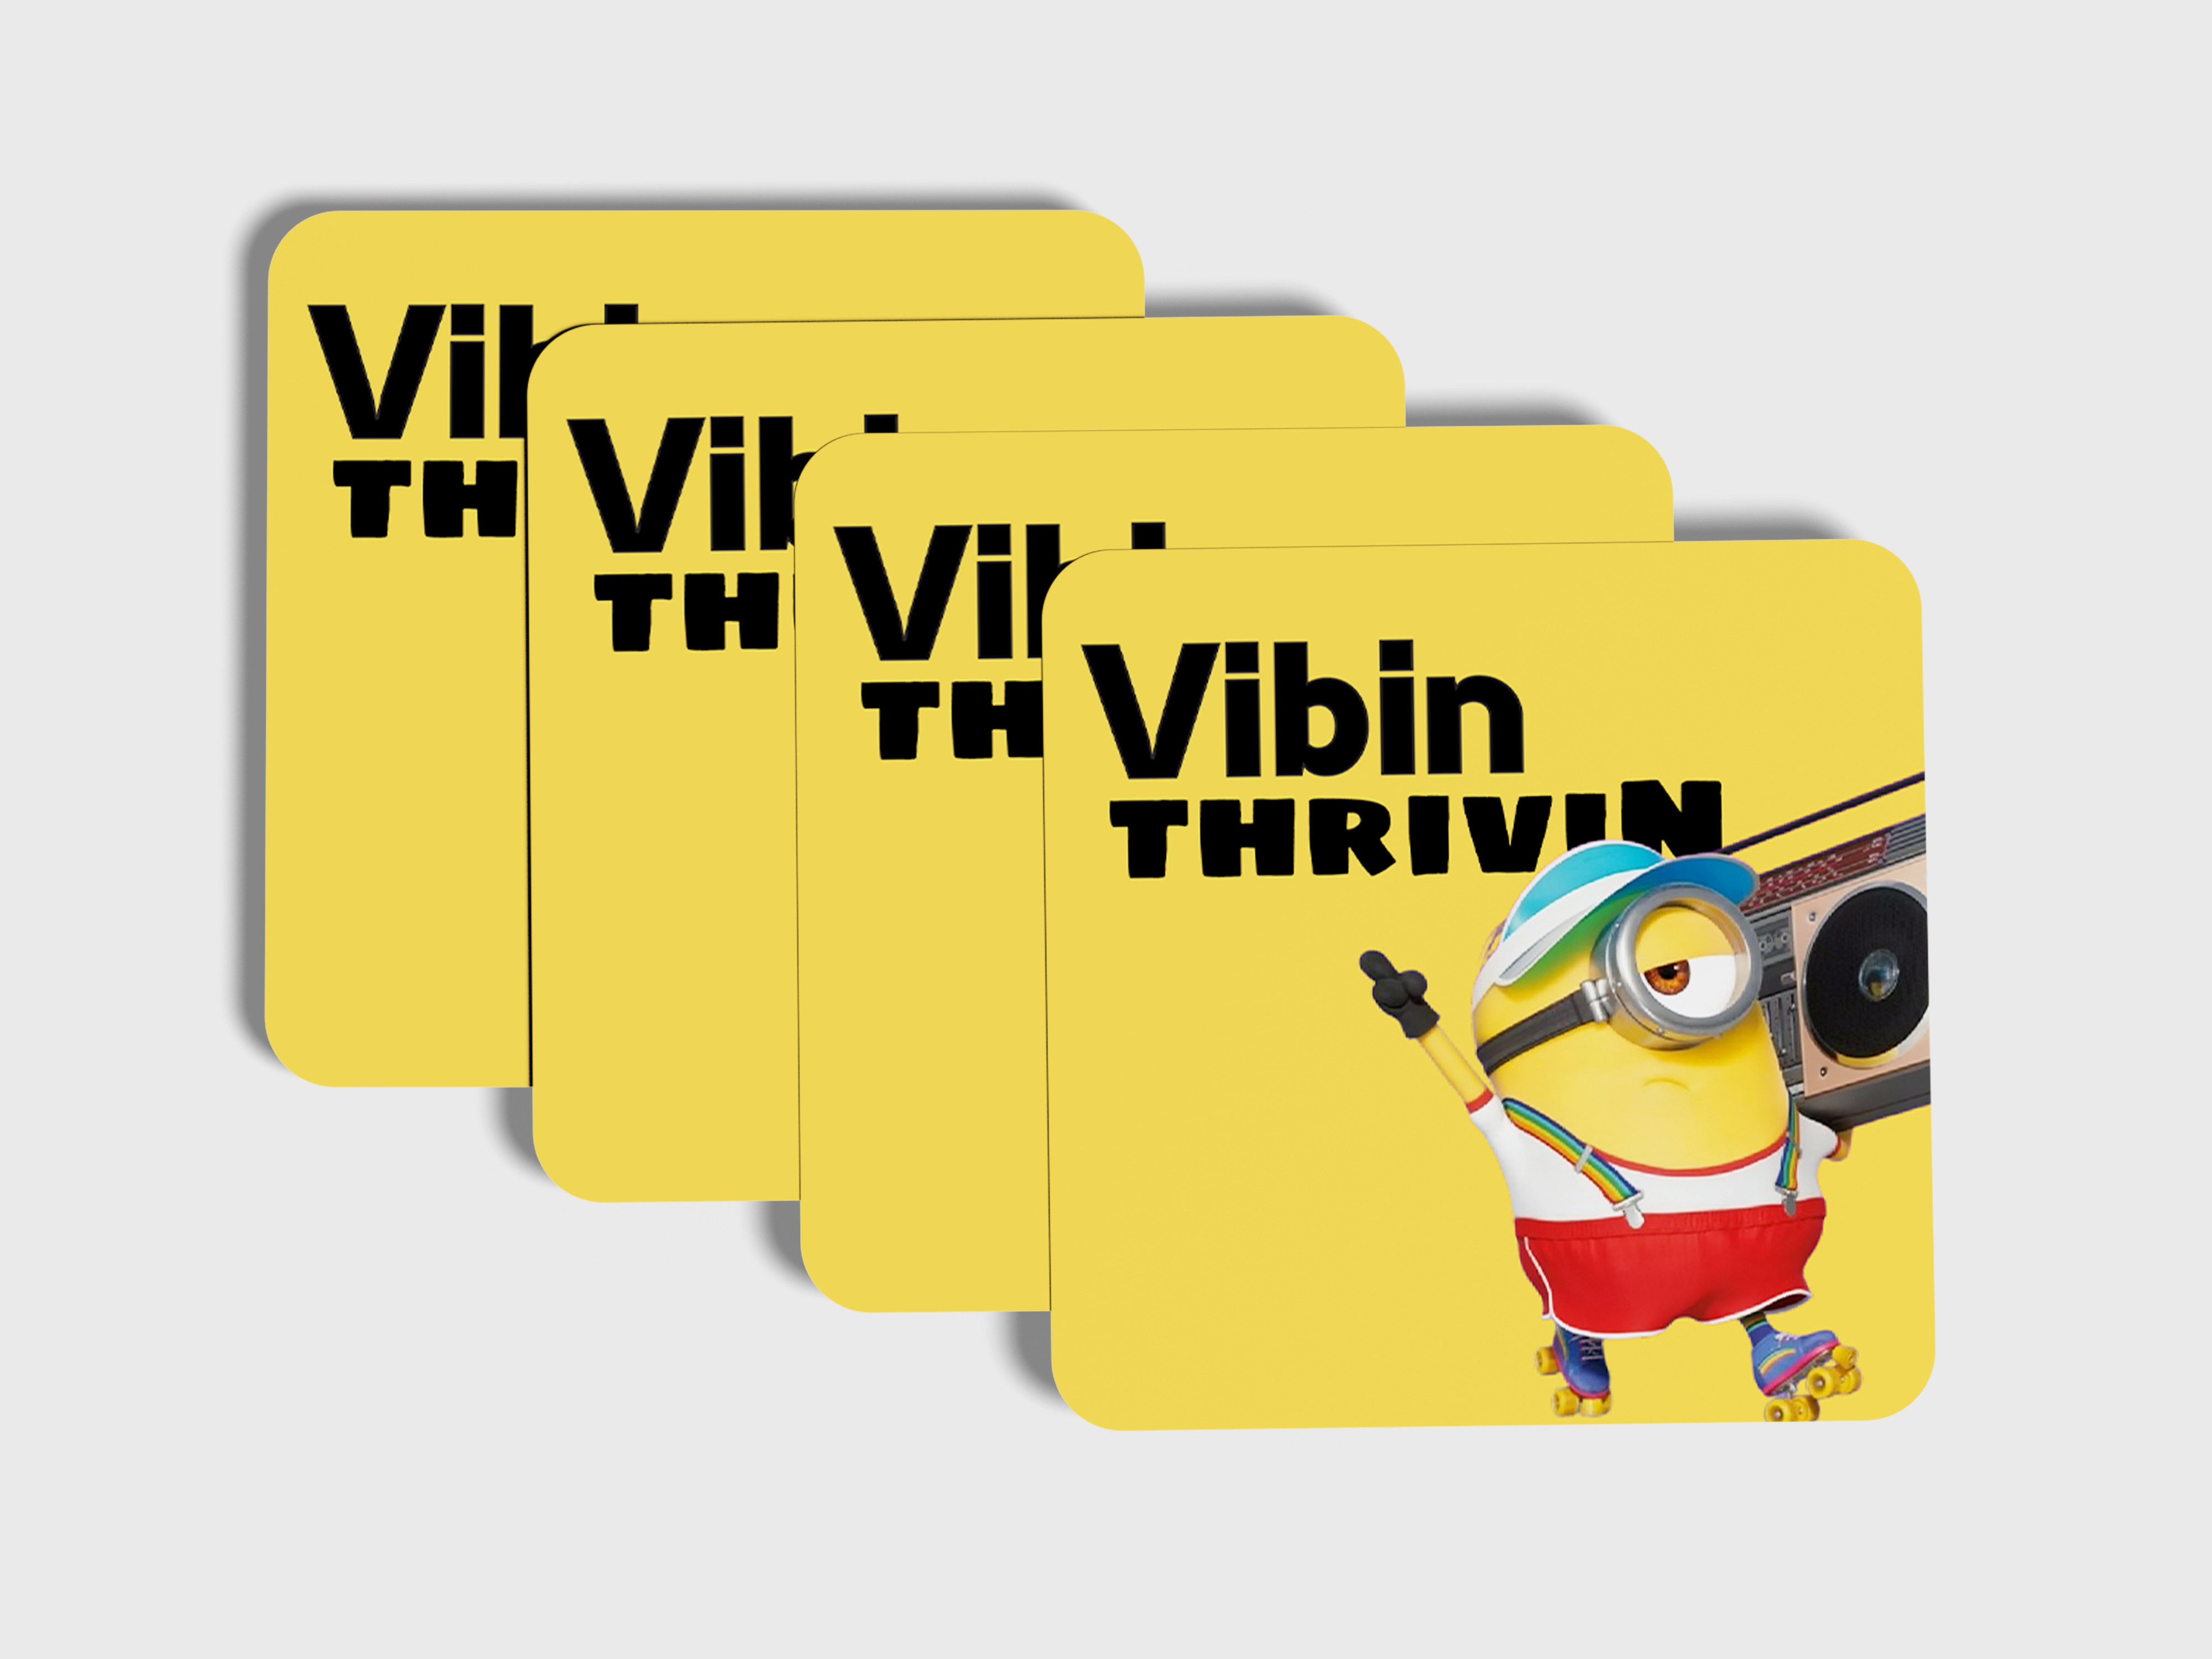 Minions Vibin Thriving Coaster Set - Add Playful Fun to Your Tabletop!